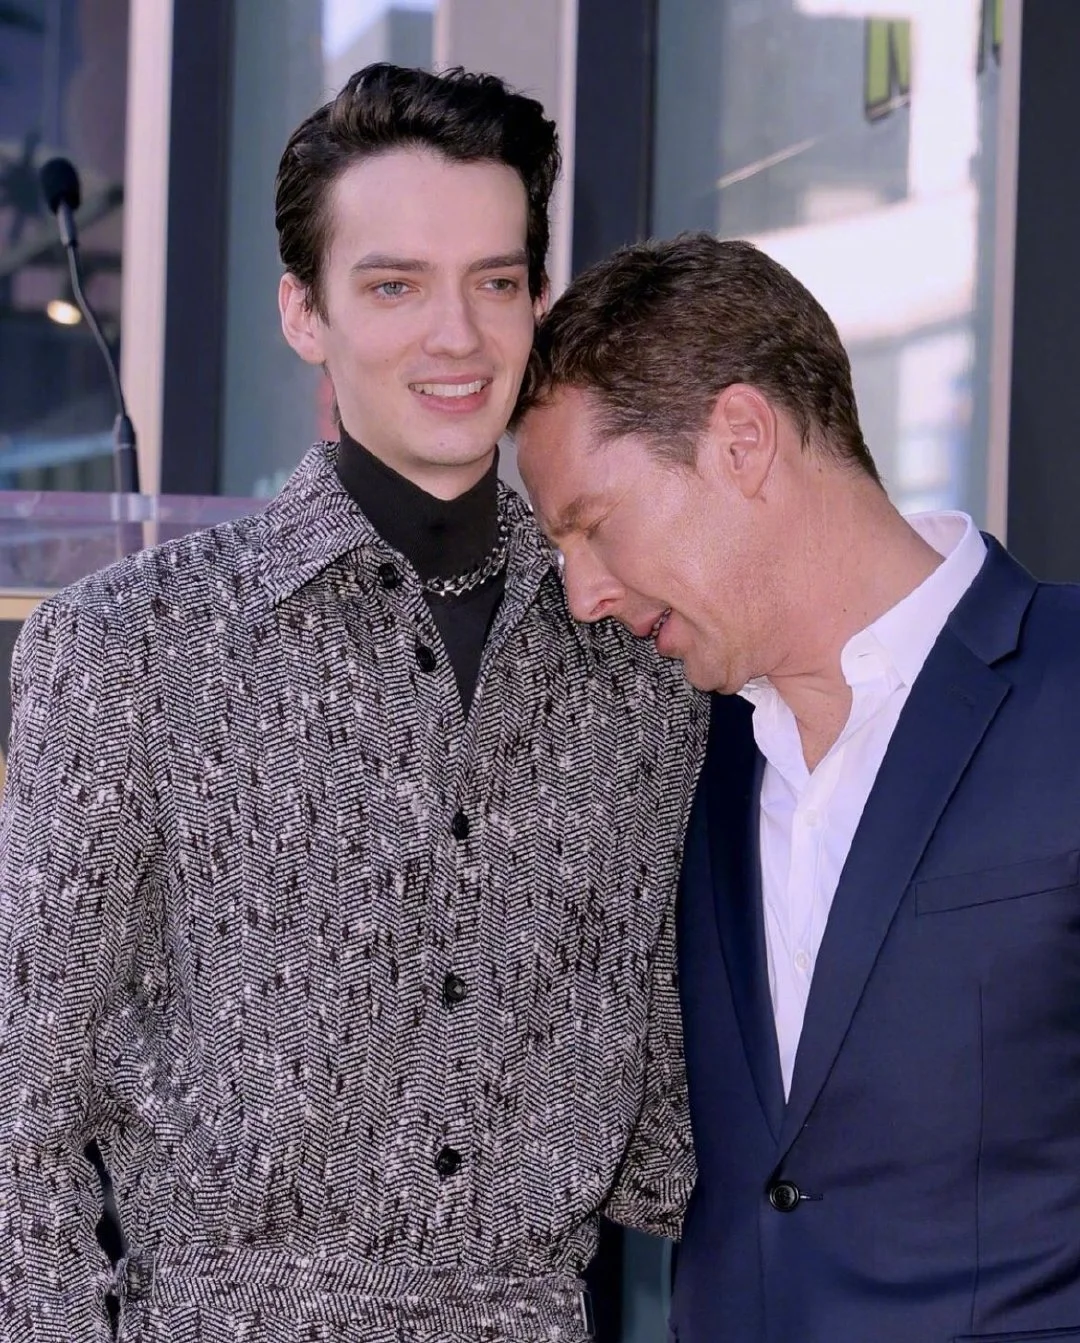 benedict-cumberbatch-leaves-a-star-that-belongs-to-him-at-walk-of-fame-5